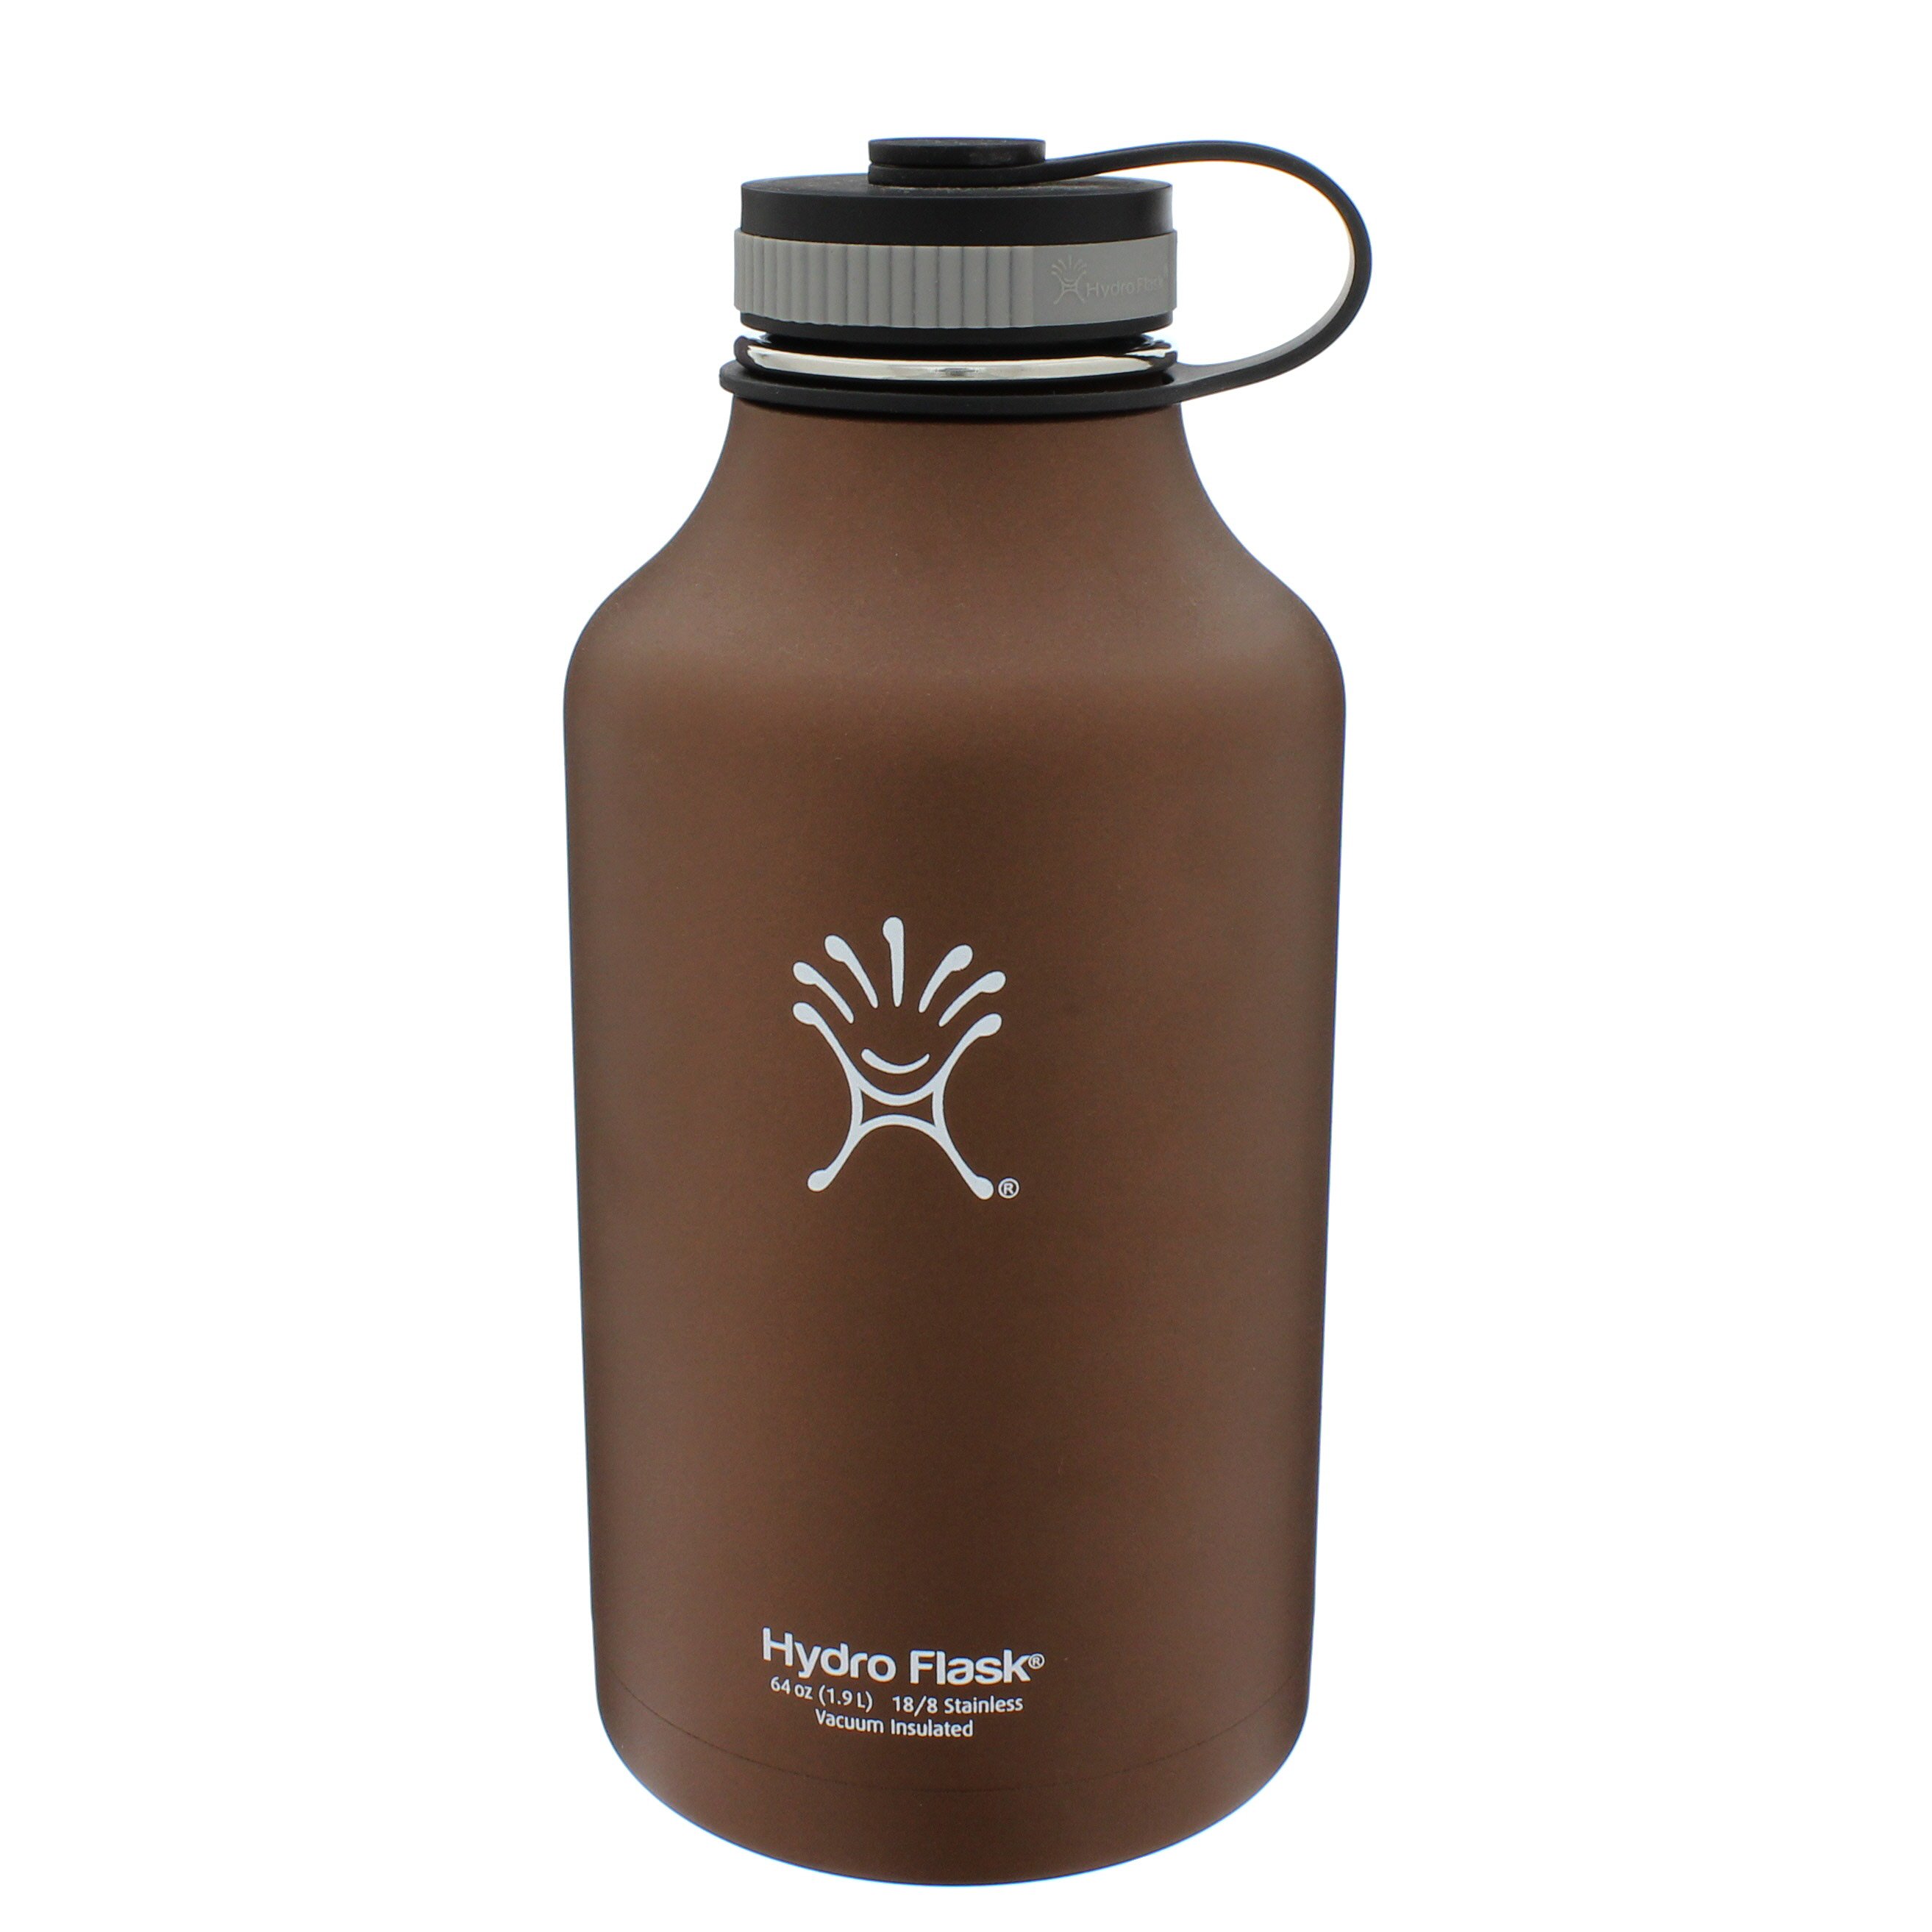 Hydro Flask, Dining, Brown Hydroflask Limited Edition